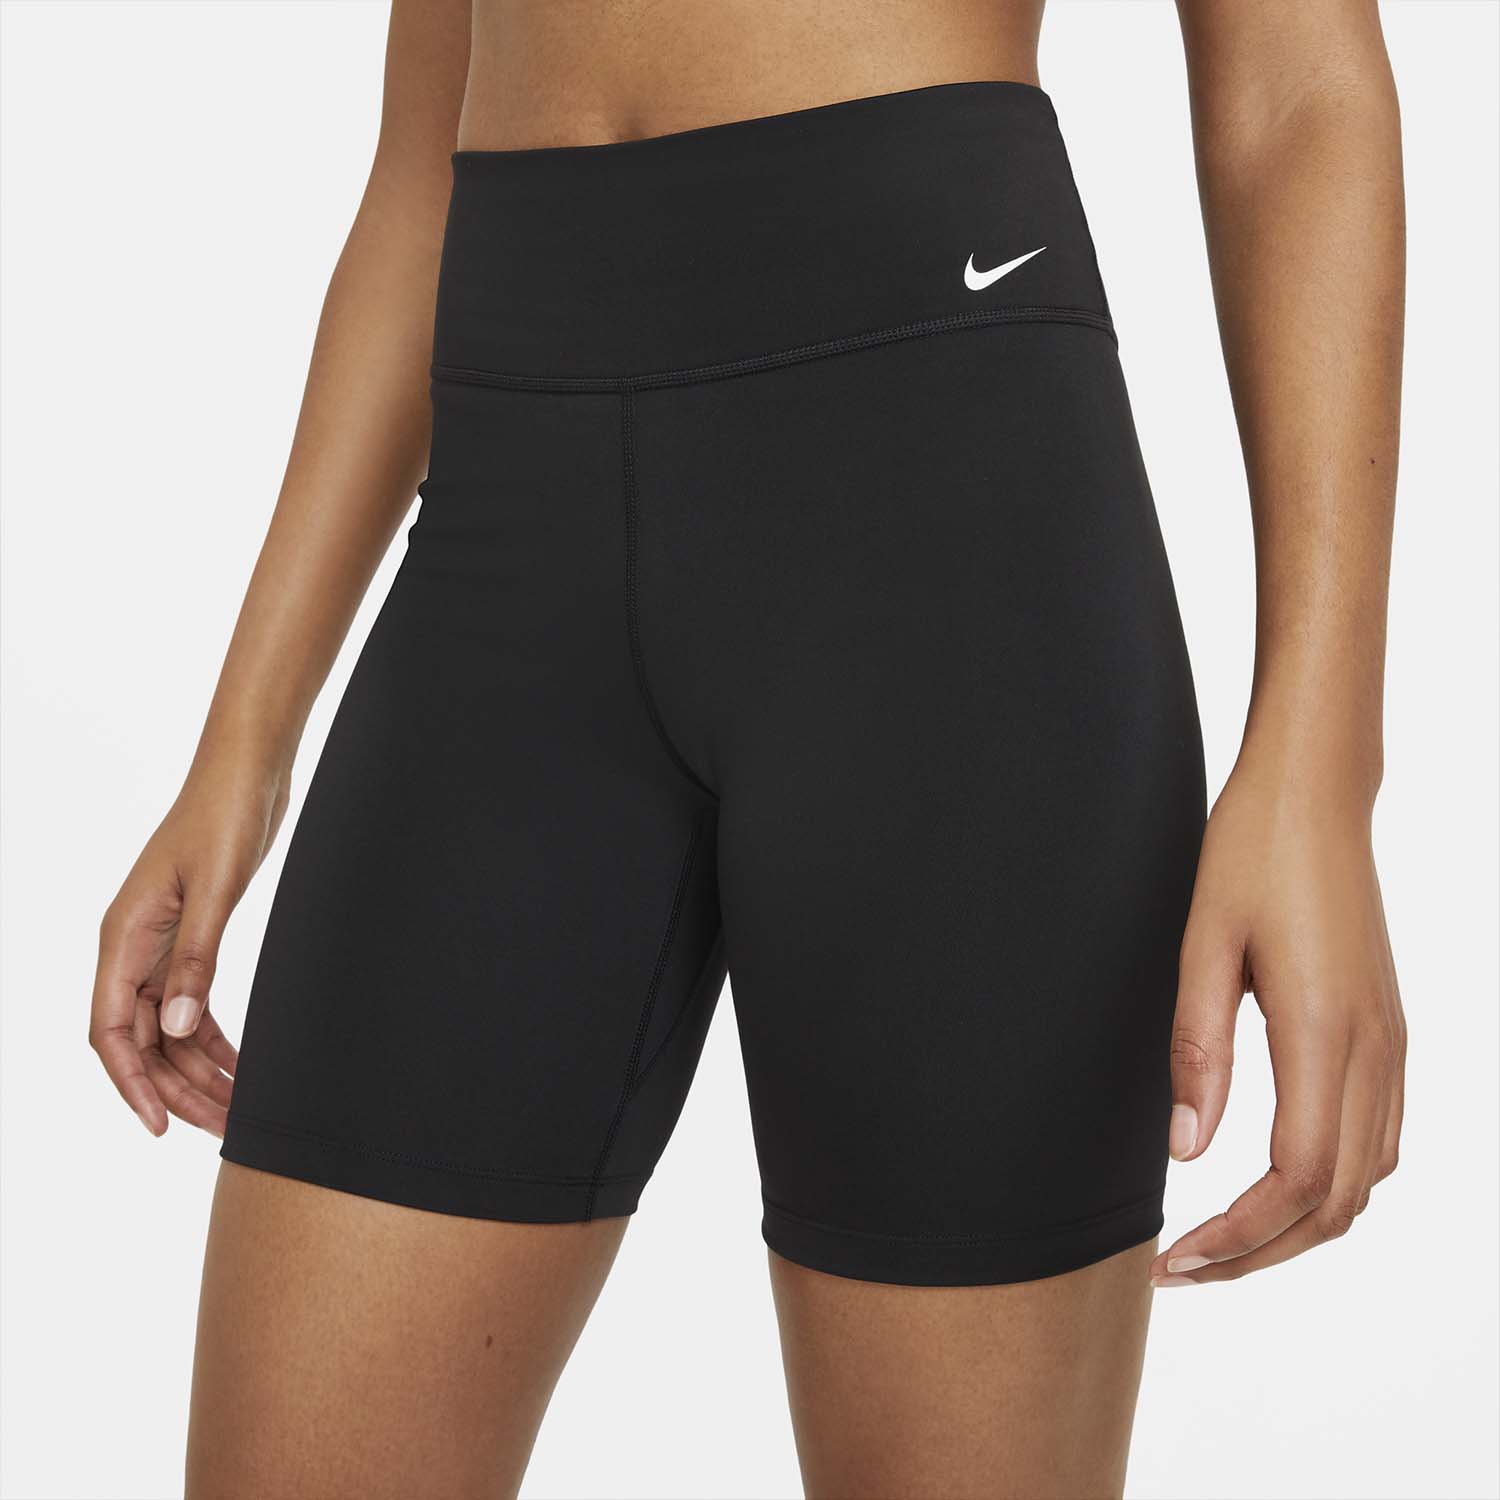 Summer For NIKE Shorts Be Ready Workouts Bike for |